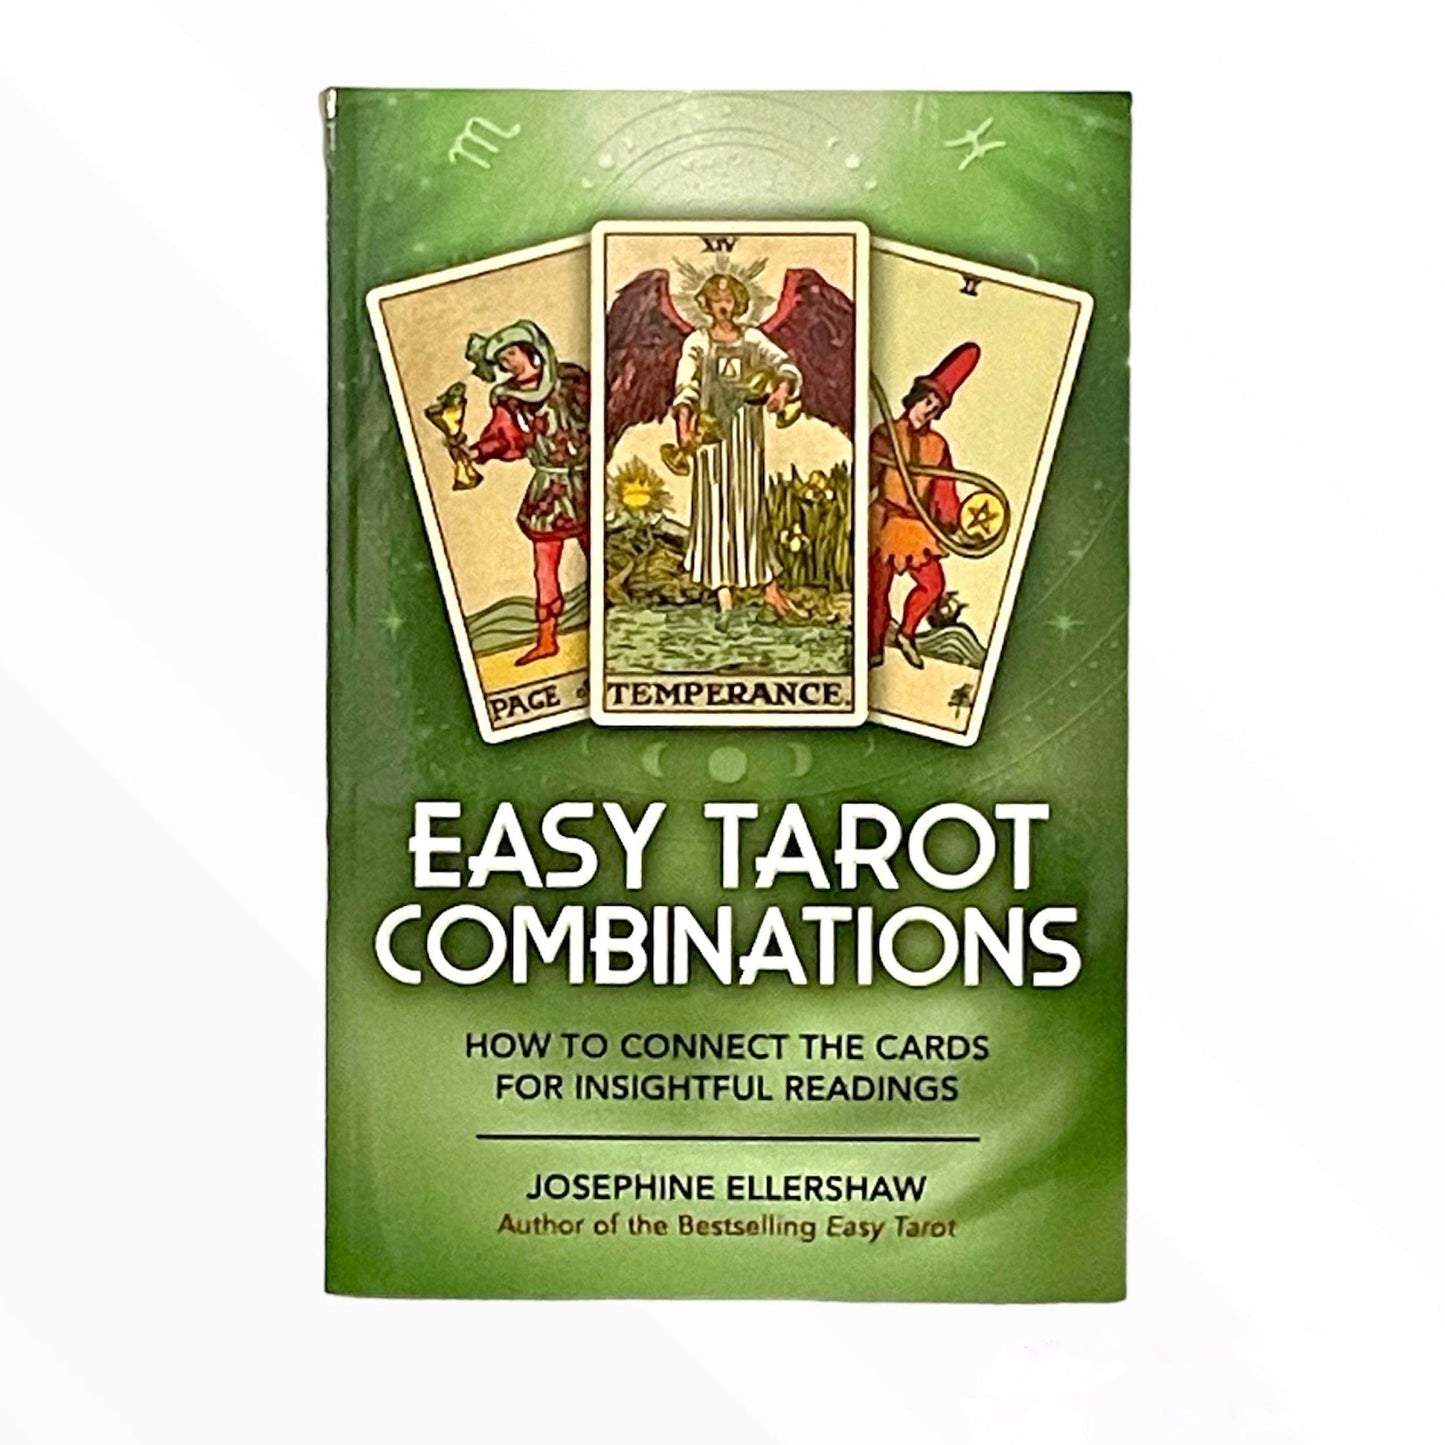 Easy Tarot Combinations: How to Connect the Cards for Insightful Readings by Josephine Ellershaw